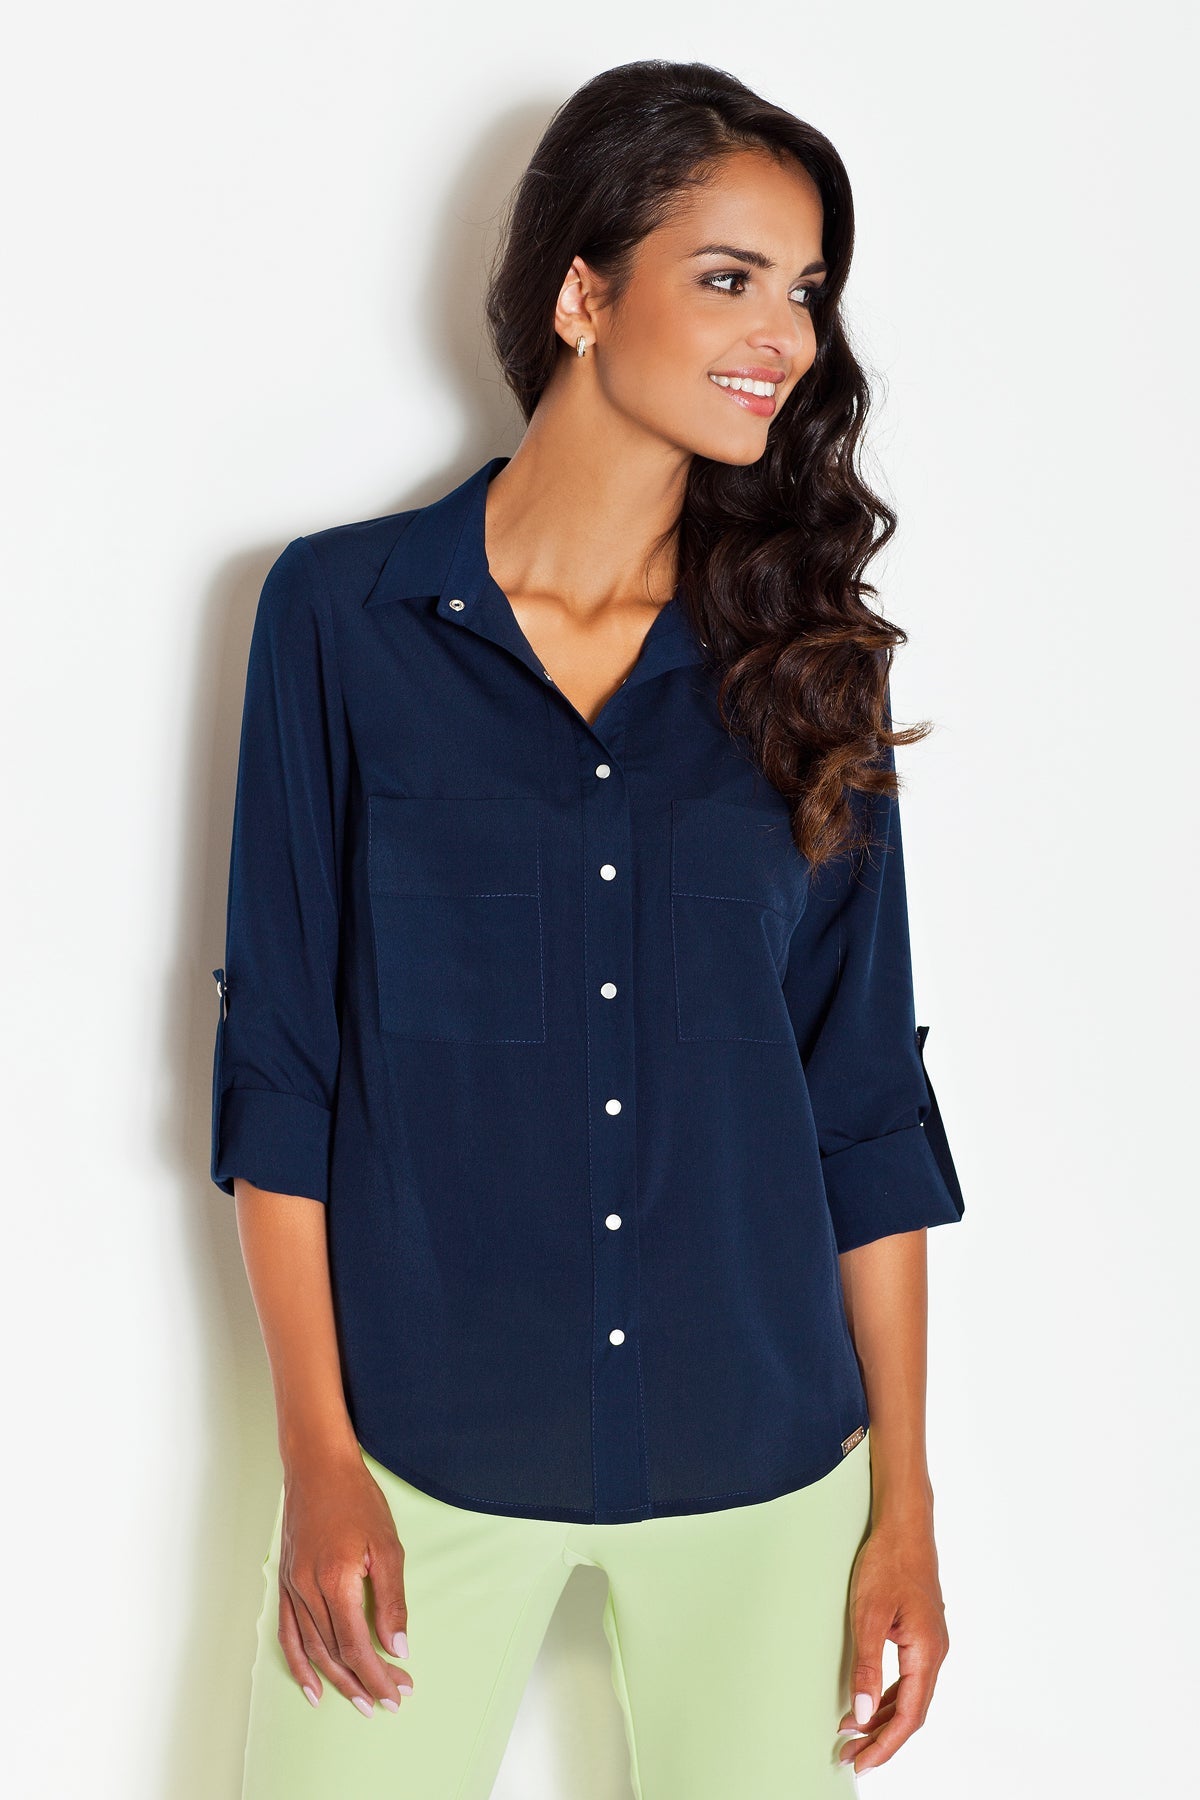 Shirt model 43750 Elsy Style Shirts for Women